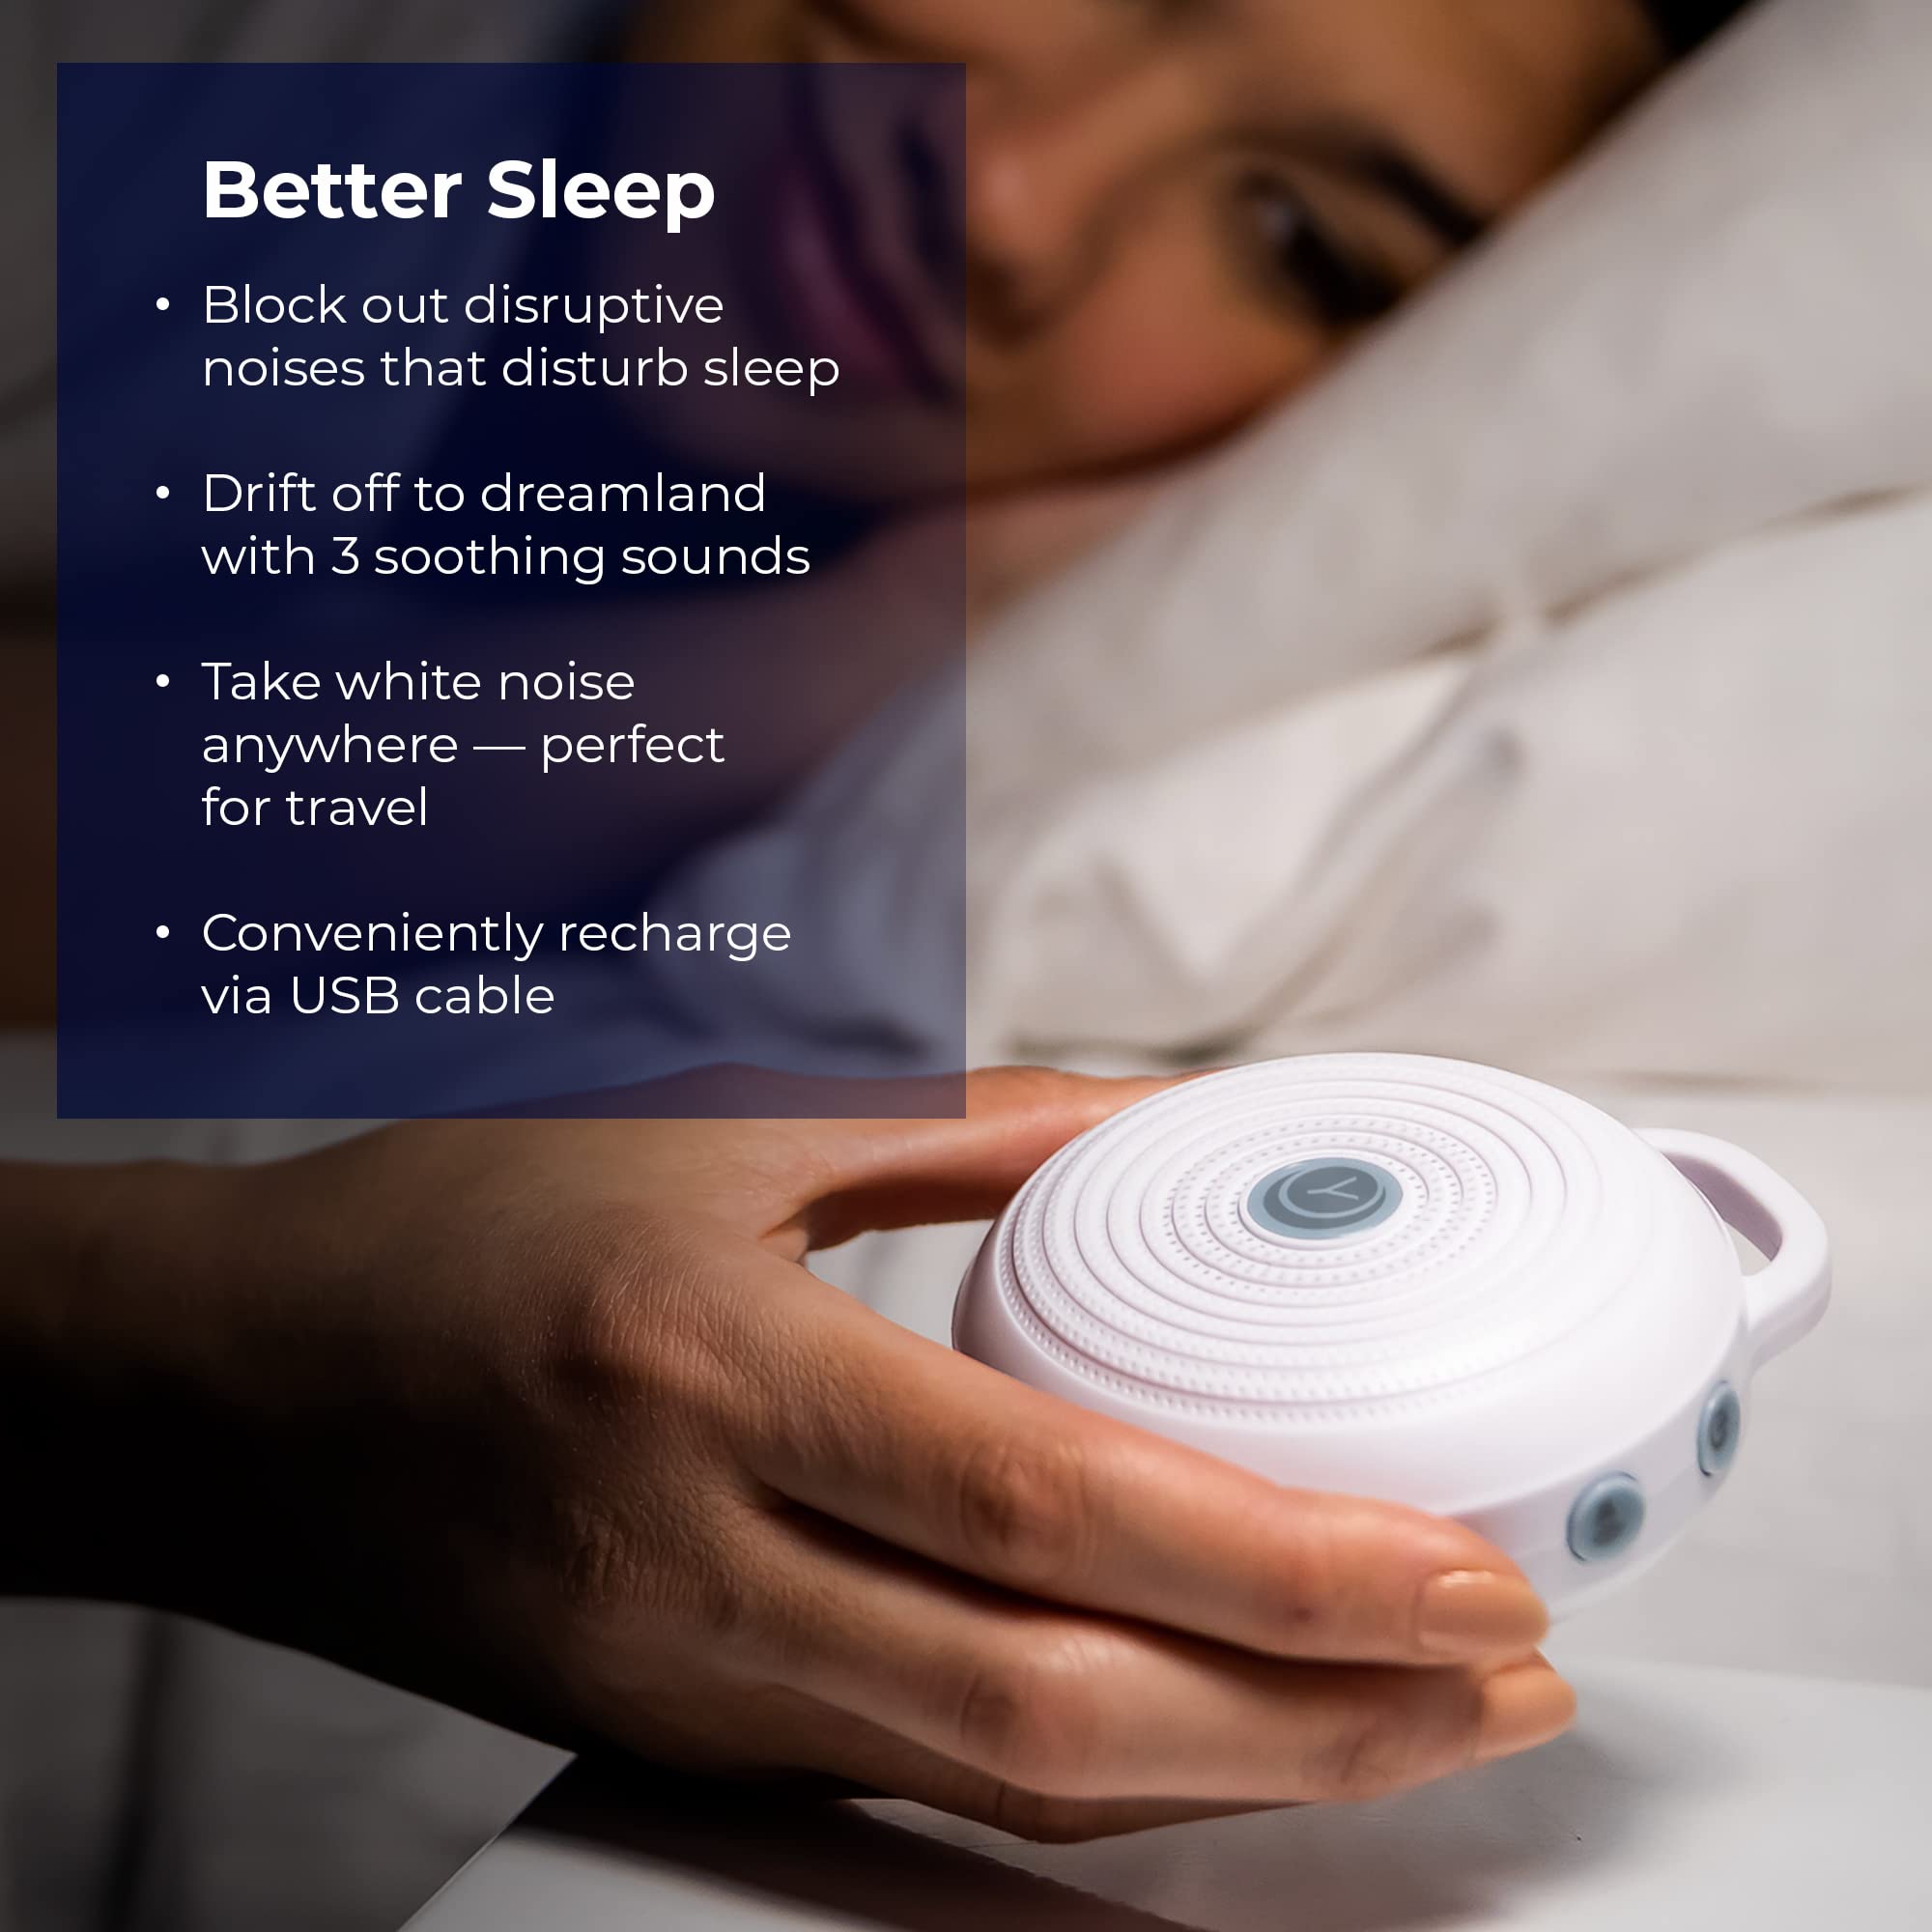 Yogasleep Rohm Portable White Noise Sound Machine, 3 Soothing Natural Sounds with Volume Control, Sleep Therapy For Adults, Kids & Baby, Noise Cancelling for Office Privacy & Meditation, Registry Gift